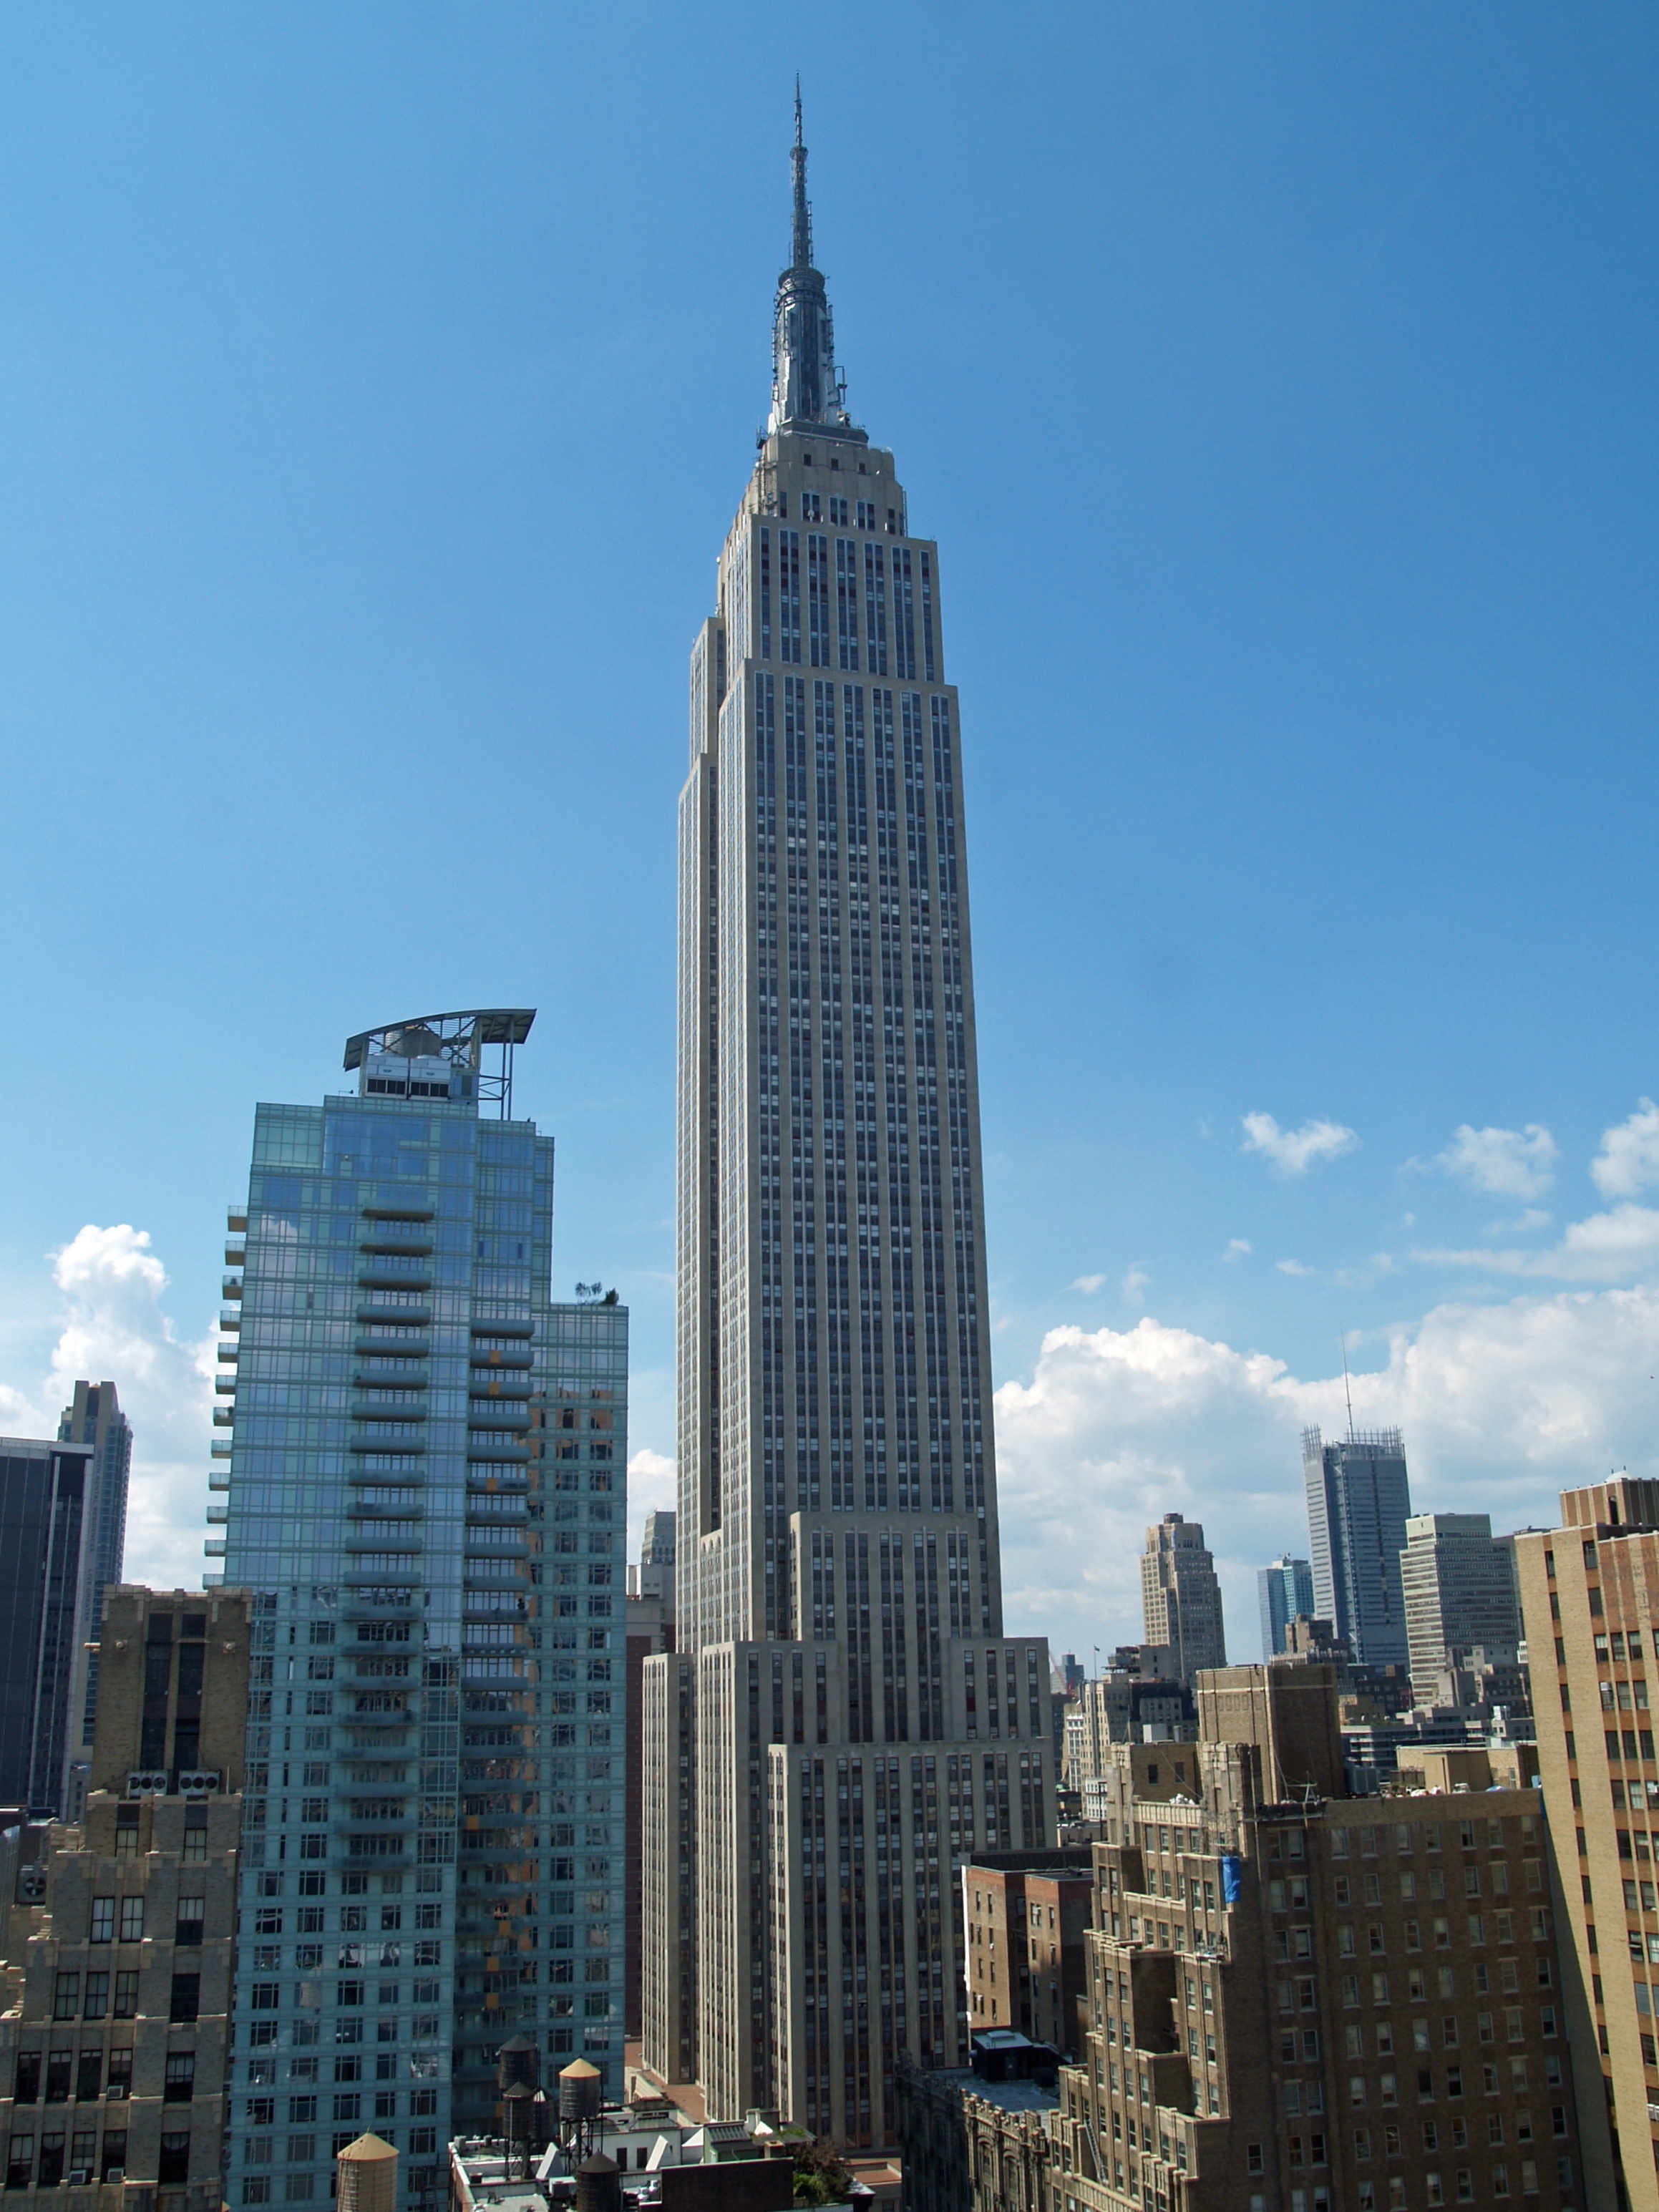 https://www.junctioneducation.com/wp-content/uploads/Empire_State_Building_by_David_Shankbone.jpg